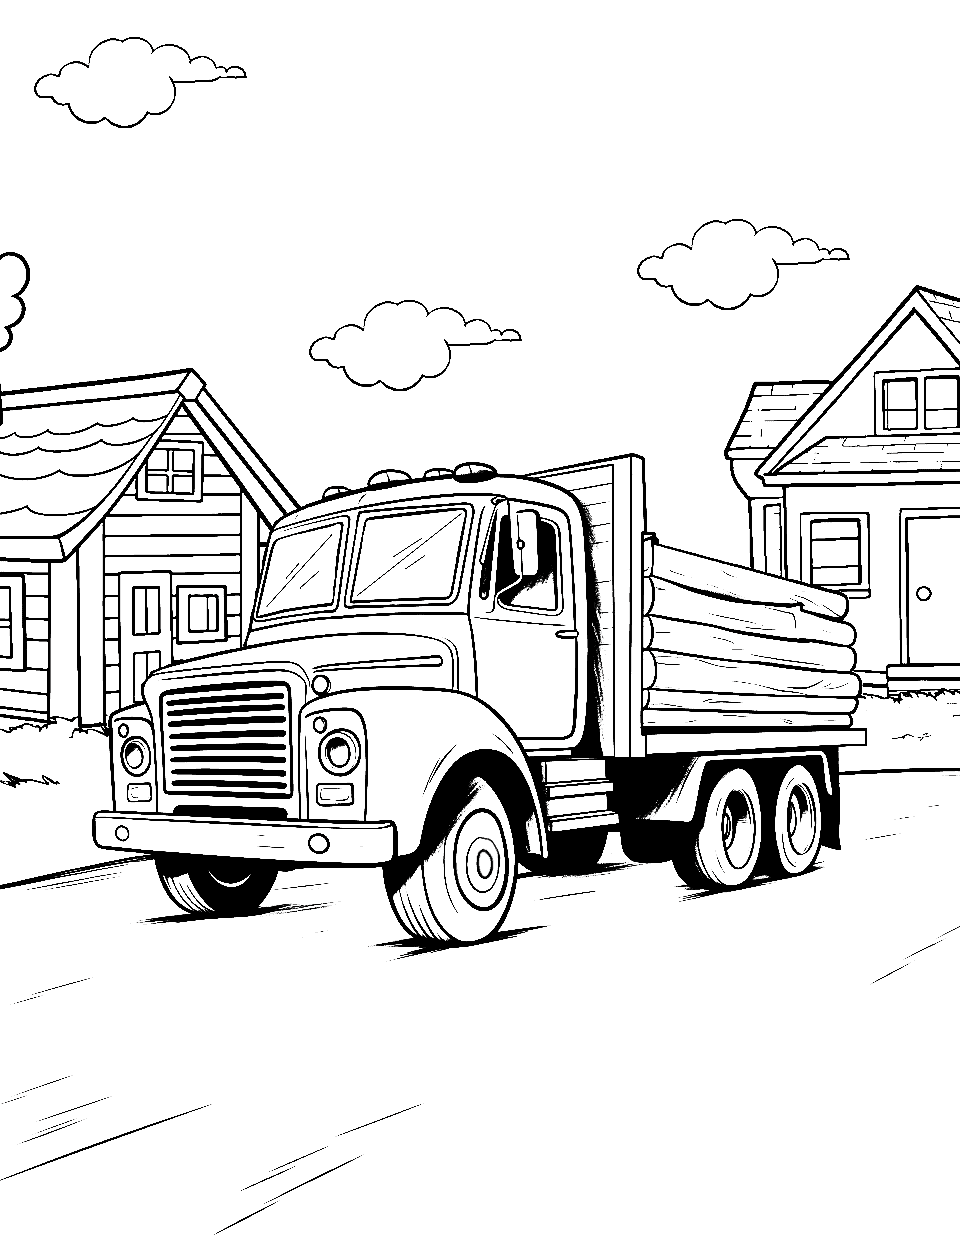 Flatbed Truck Delivery Coloring Page - A flatbed truck carrying wooden logs through a quiet town.